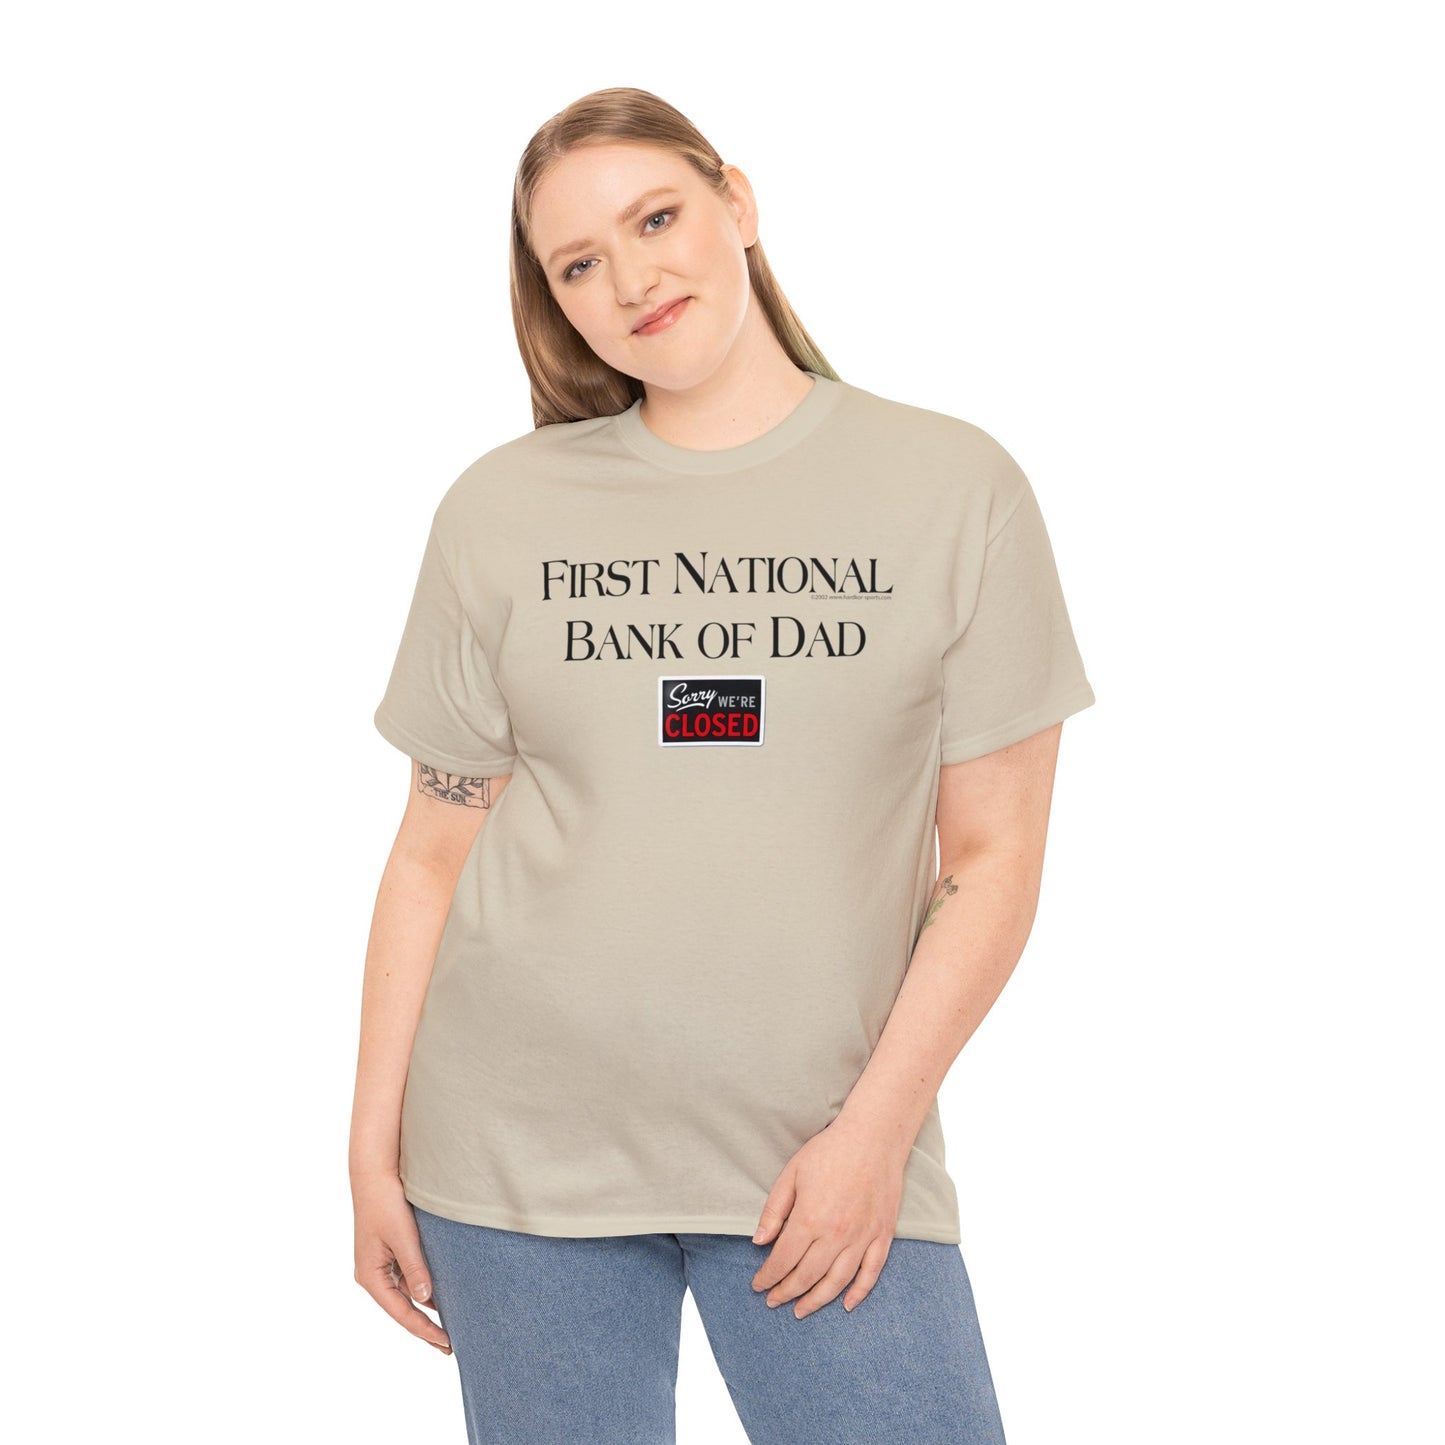 First National Bank of Dad, Sorry We're Closed, Funny T-Shirt, Dad's Day Tee, Fun Gift for Dad, Father's Day T-Shirt